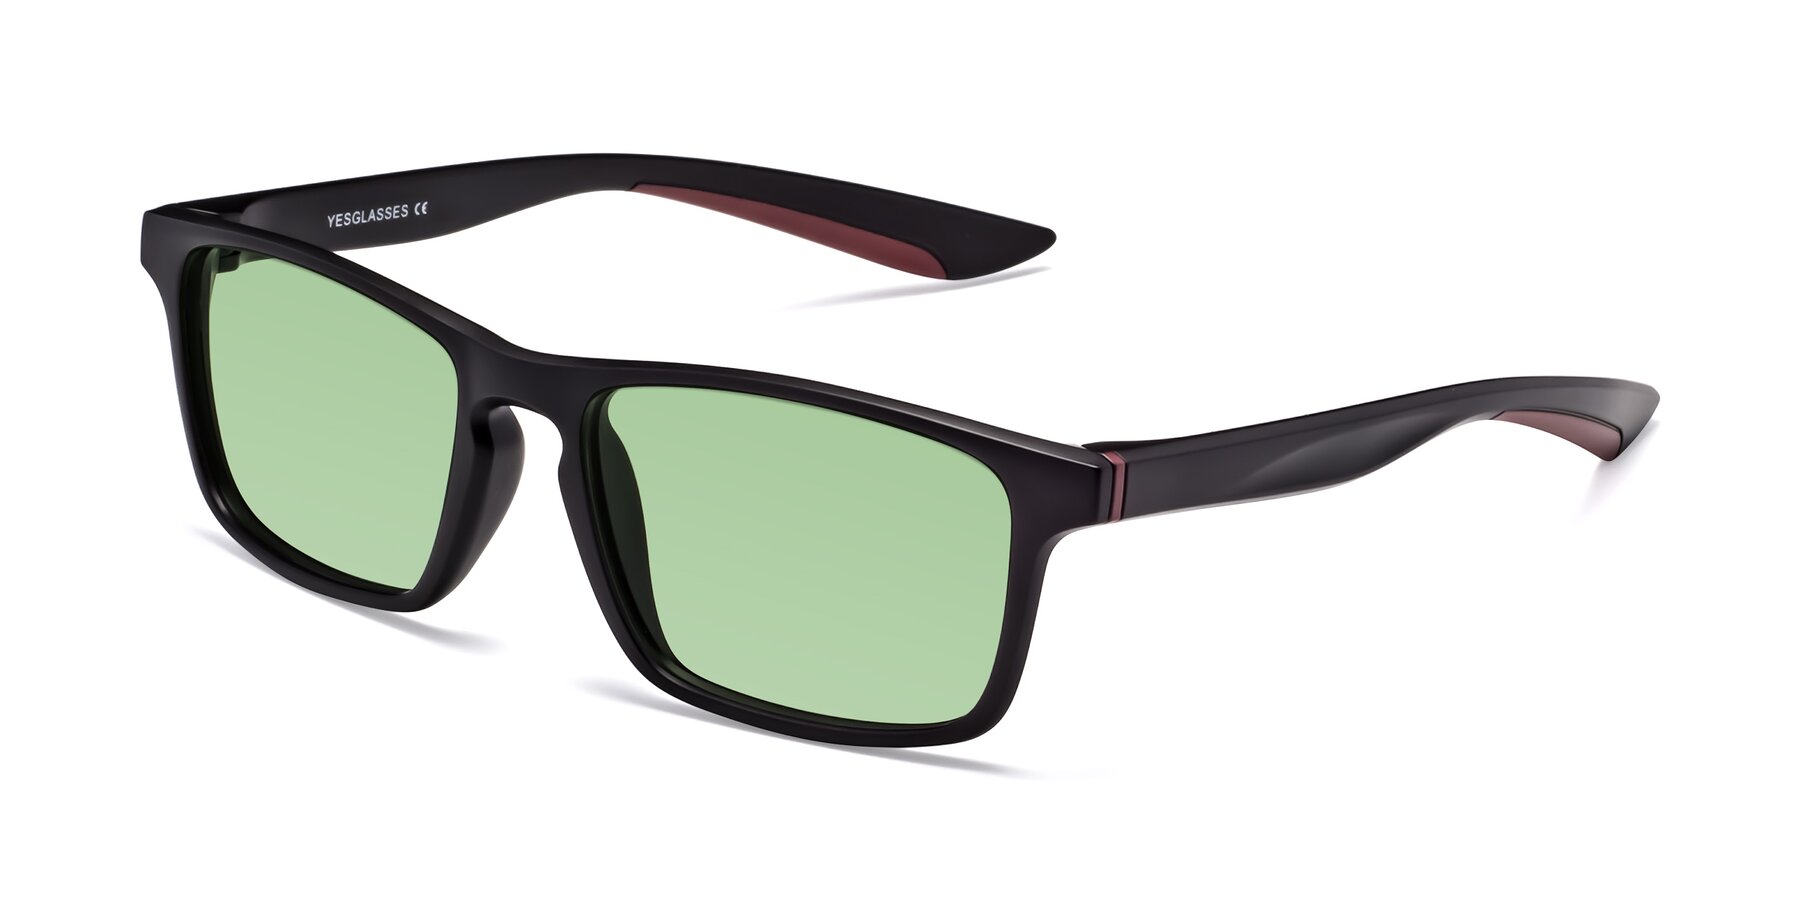 Angle of Passion in Matte Black-Wine with Medium Green Tinted Lenses